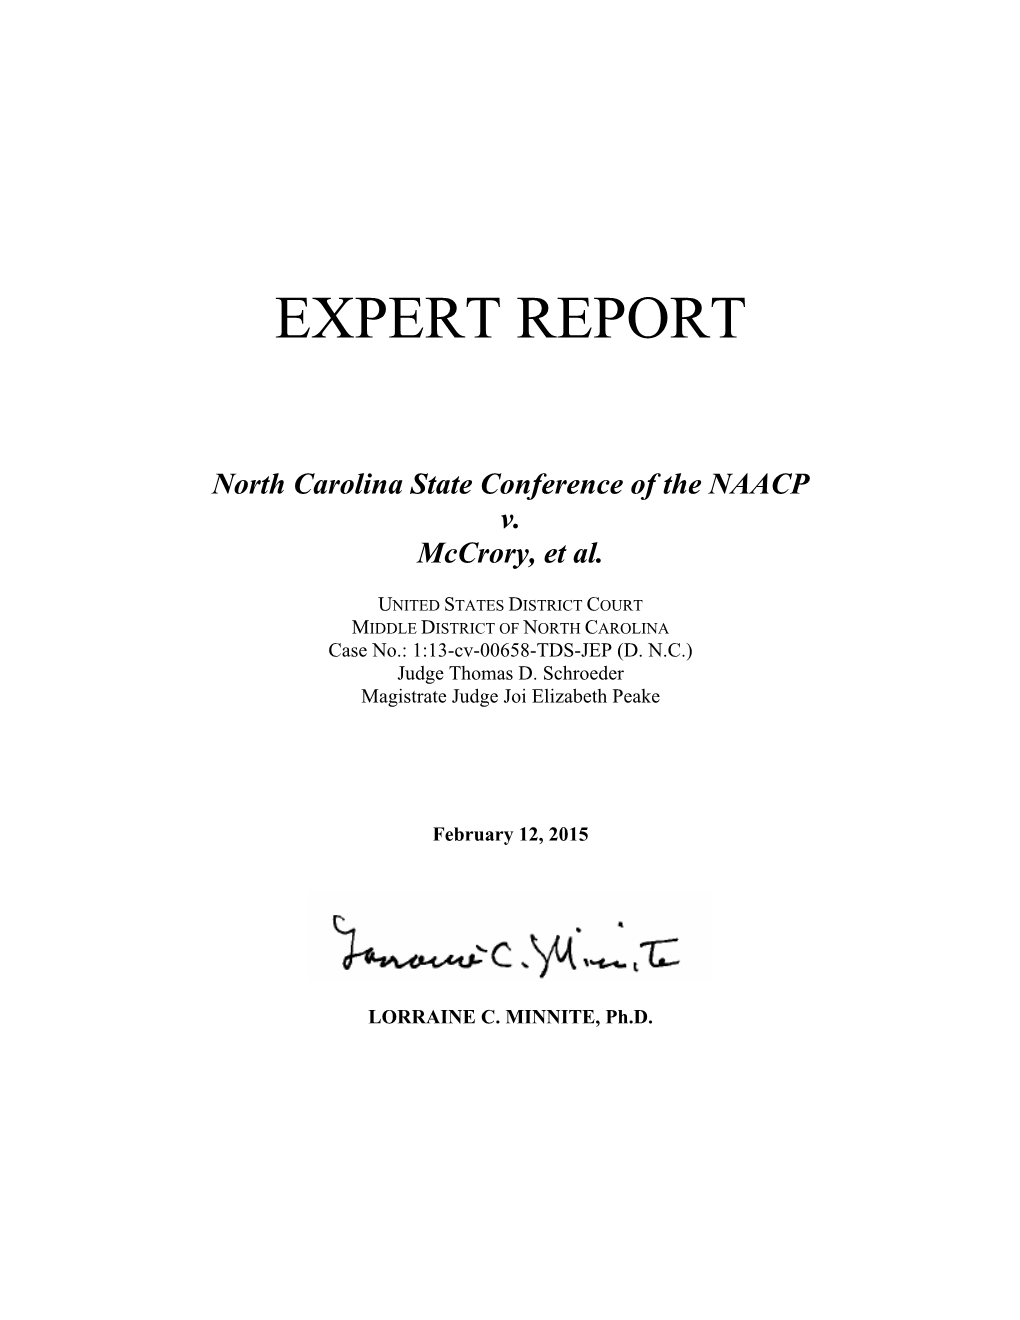 Expert Report on Voter Fraud and Testified As a Fact Witness in ACORN, Et Al